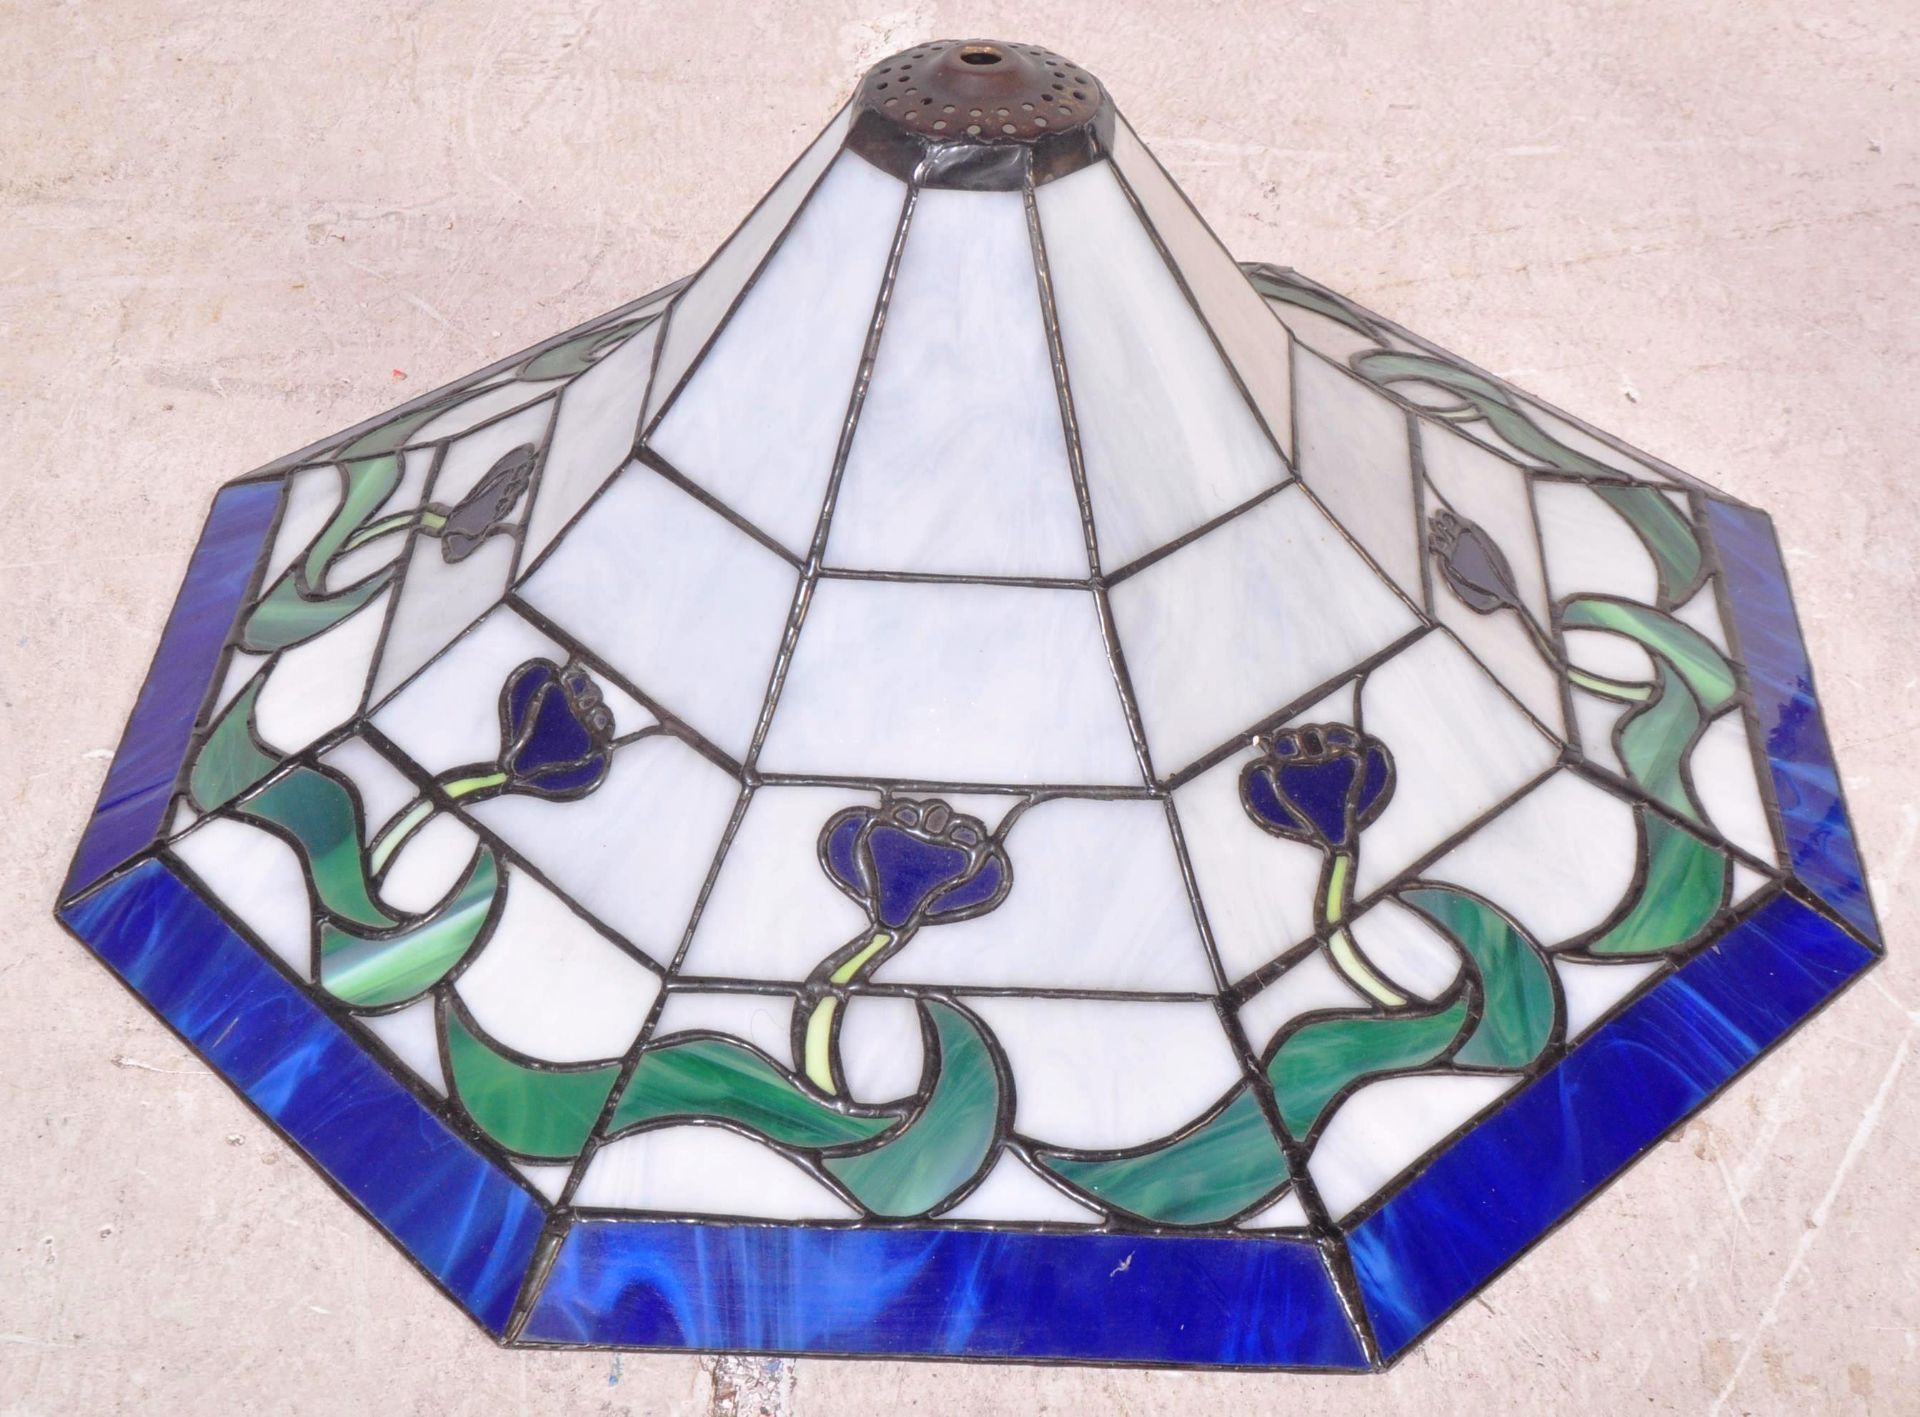 TWO TIFFANY STYLE CEILING LAMP SHADES - Image 3 of 6